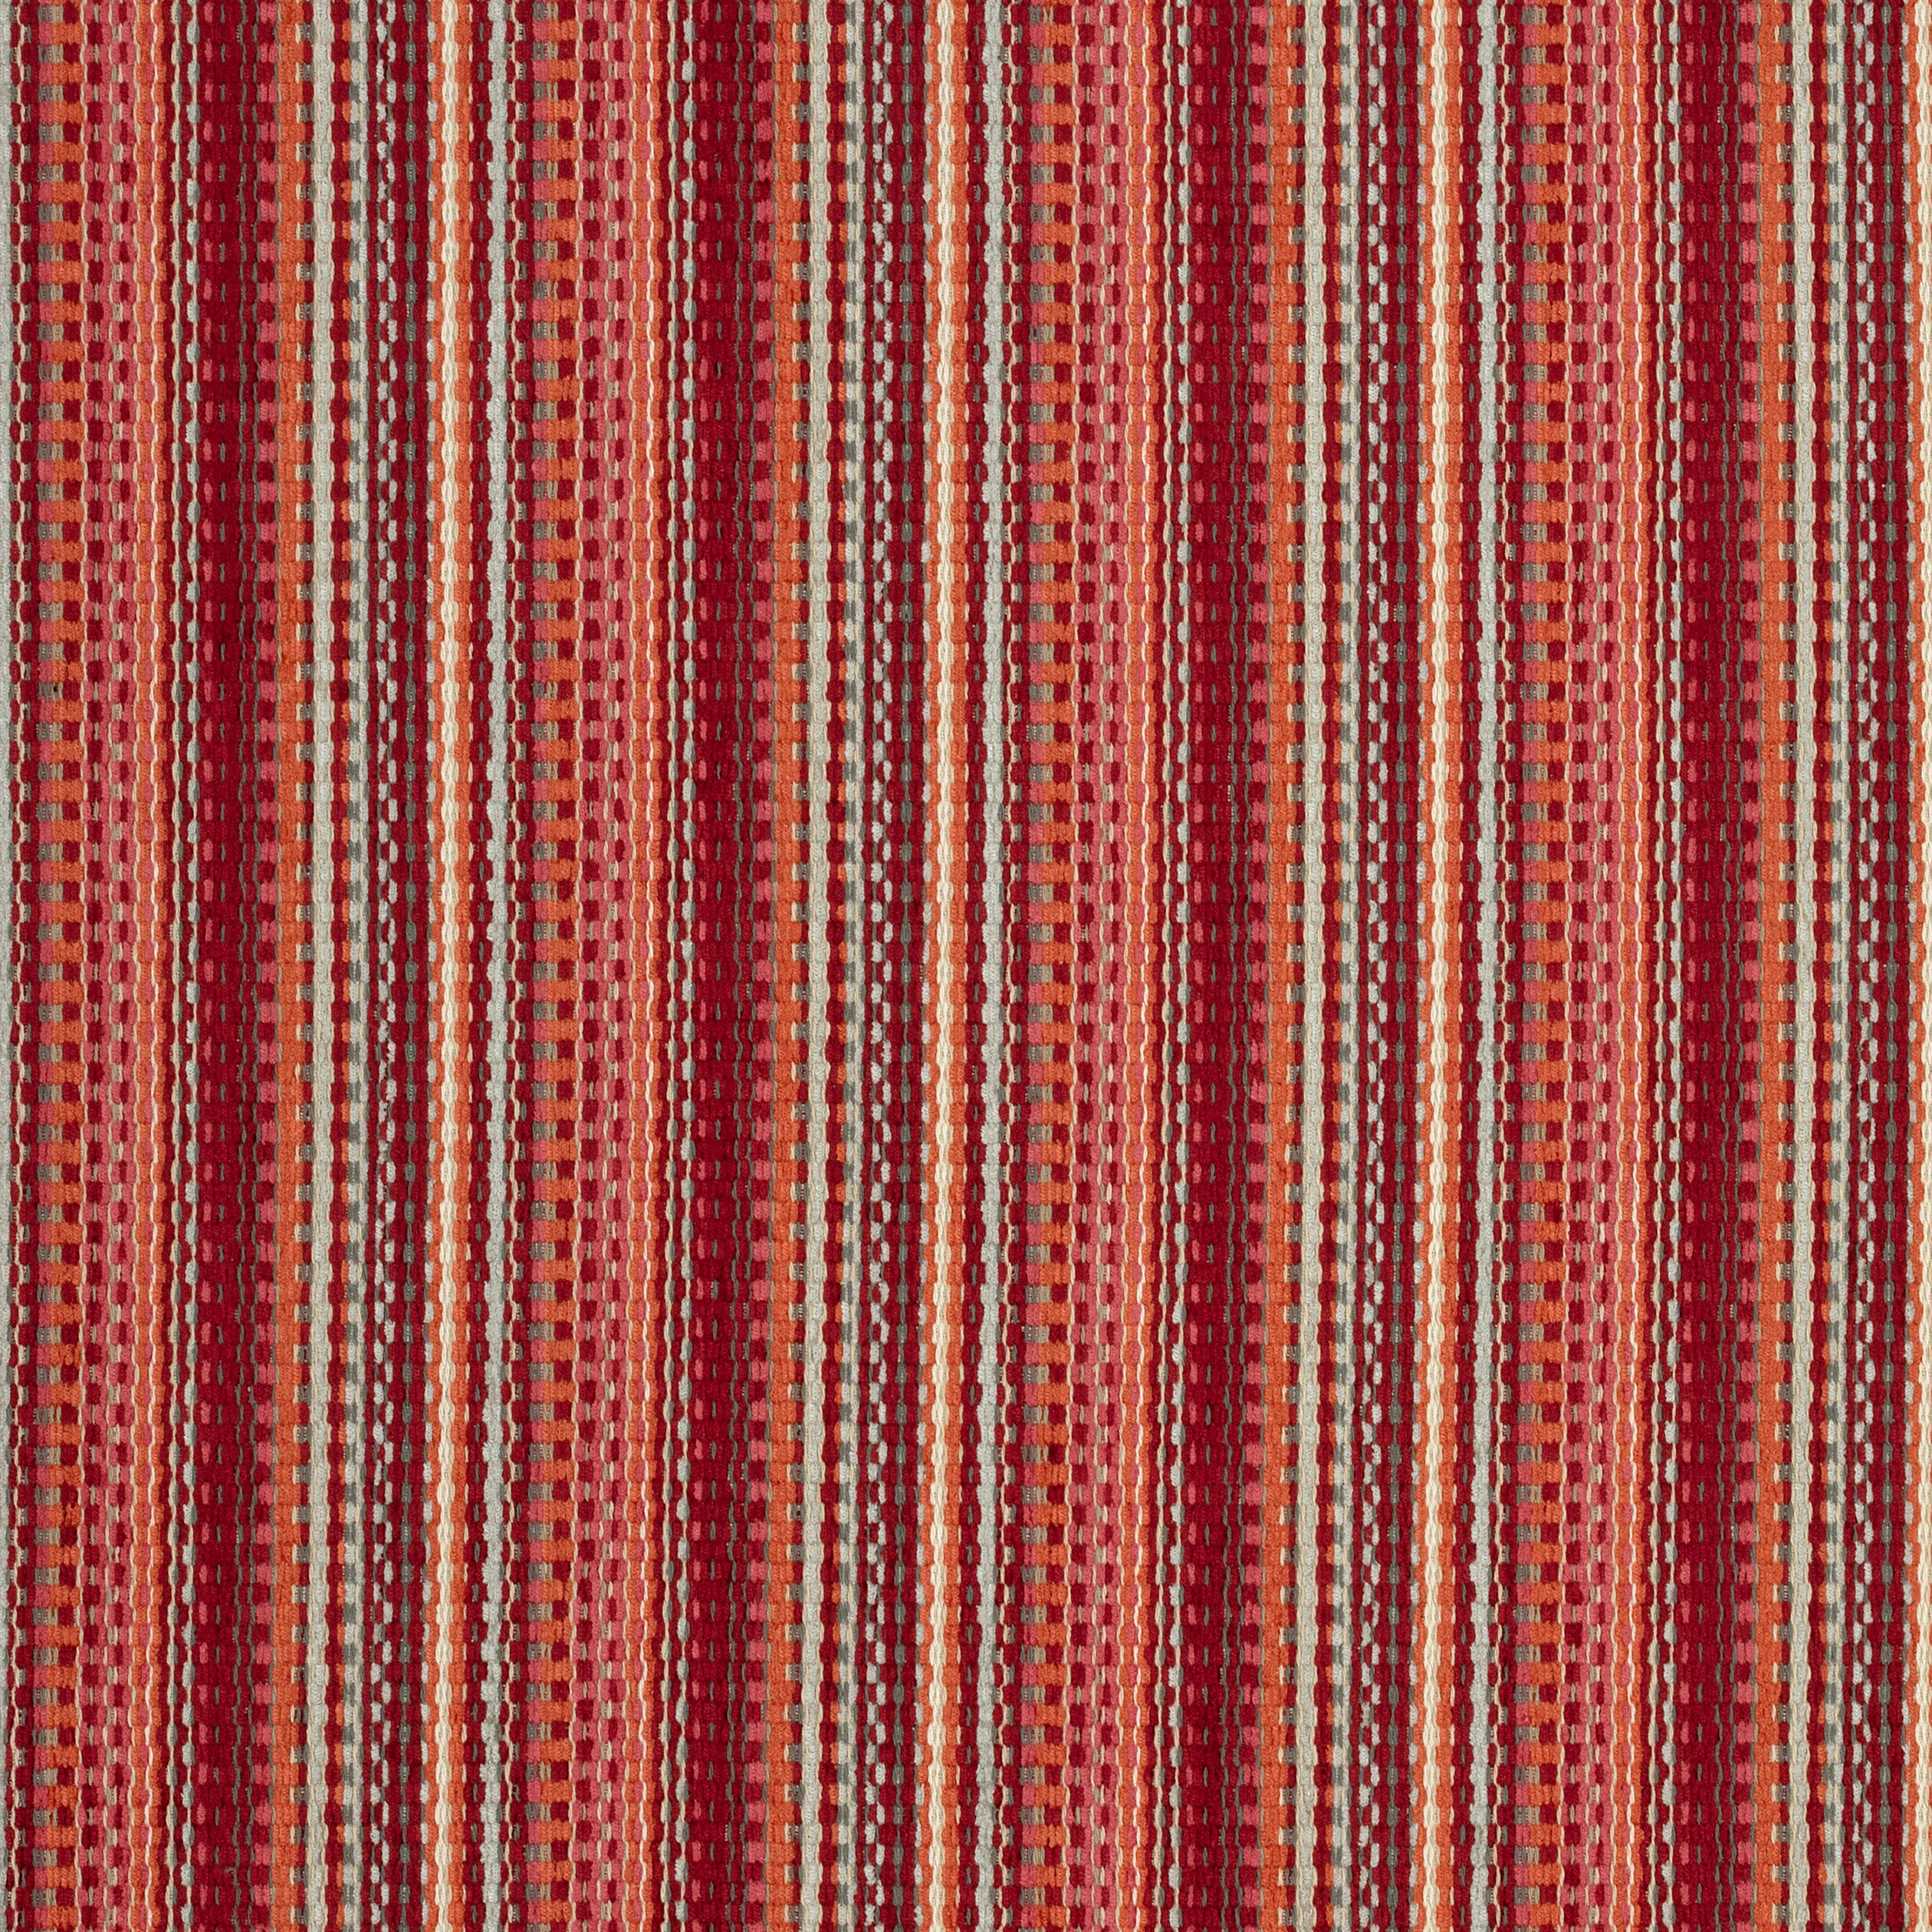 Kachina fabric in red color - pattern number W73356 - by Thibaut in the Nomad collection